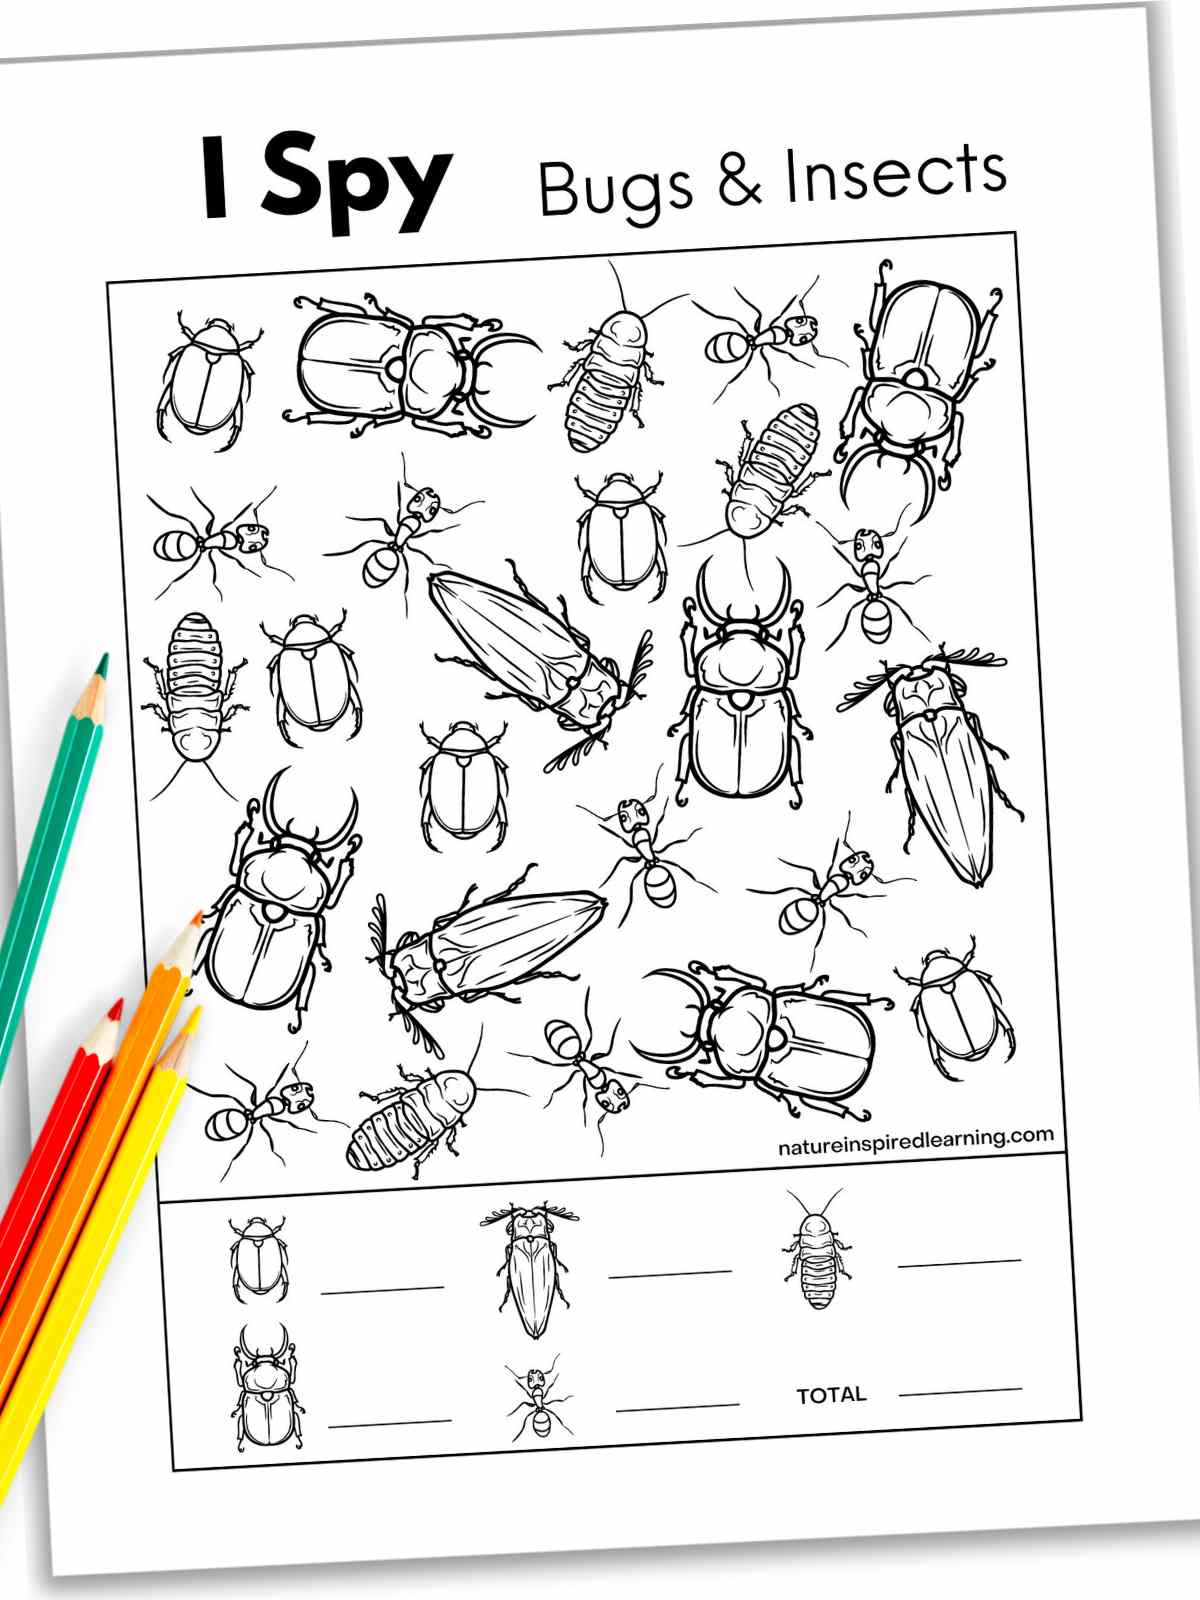 Black and white i spy worksheet with different insects including ants and beetles with colored pencils bottom left.